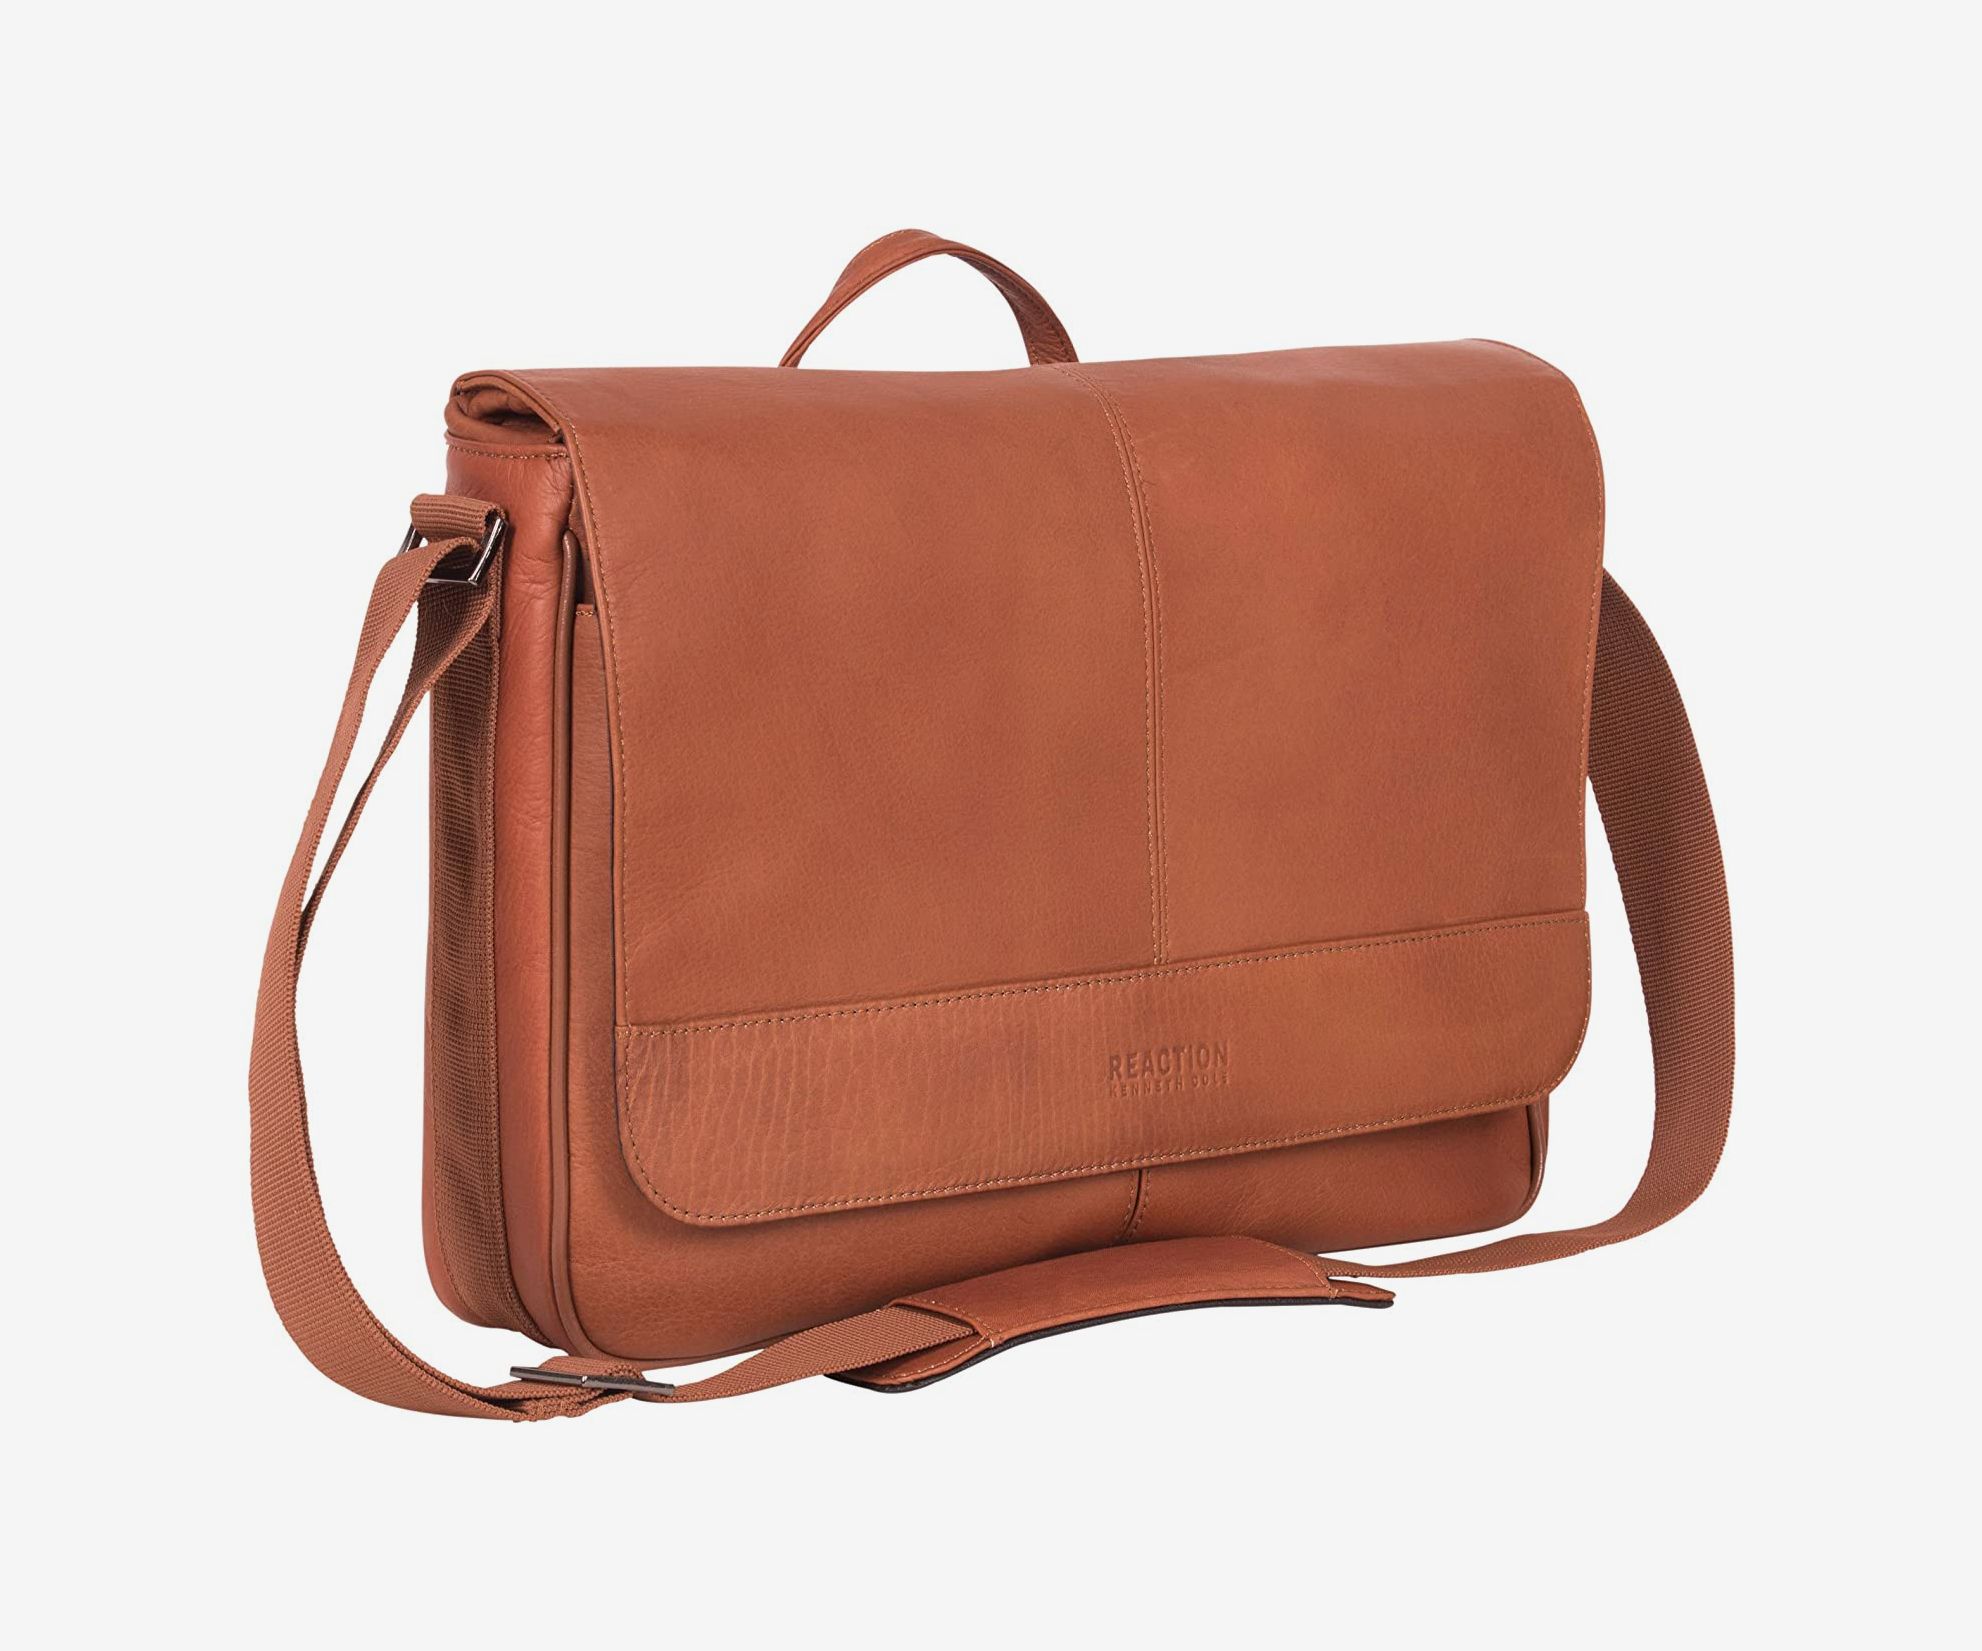 Mens Laptop Messenger Bag Shoulder Bag Mens Handbags Shoulder Bags Messenger Bags Computer Bags Travel Bags Luggage Bags Briefcases Casual Bags Business Bags Applicable People Middle-aged Youth 